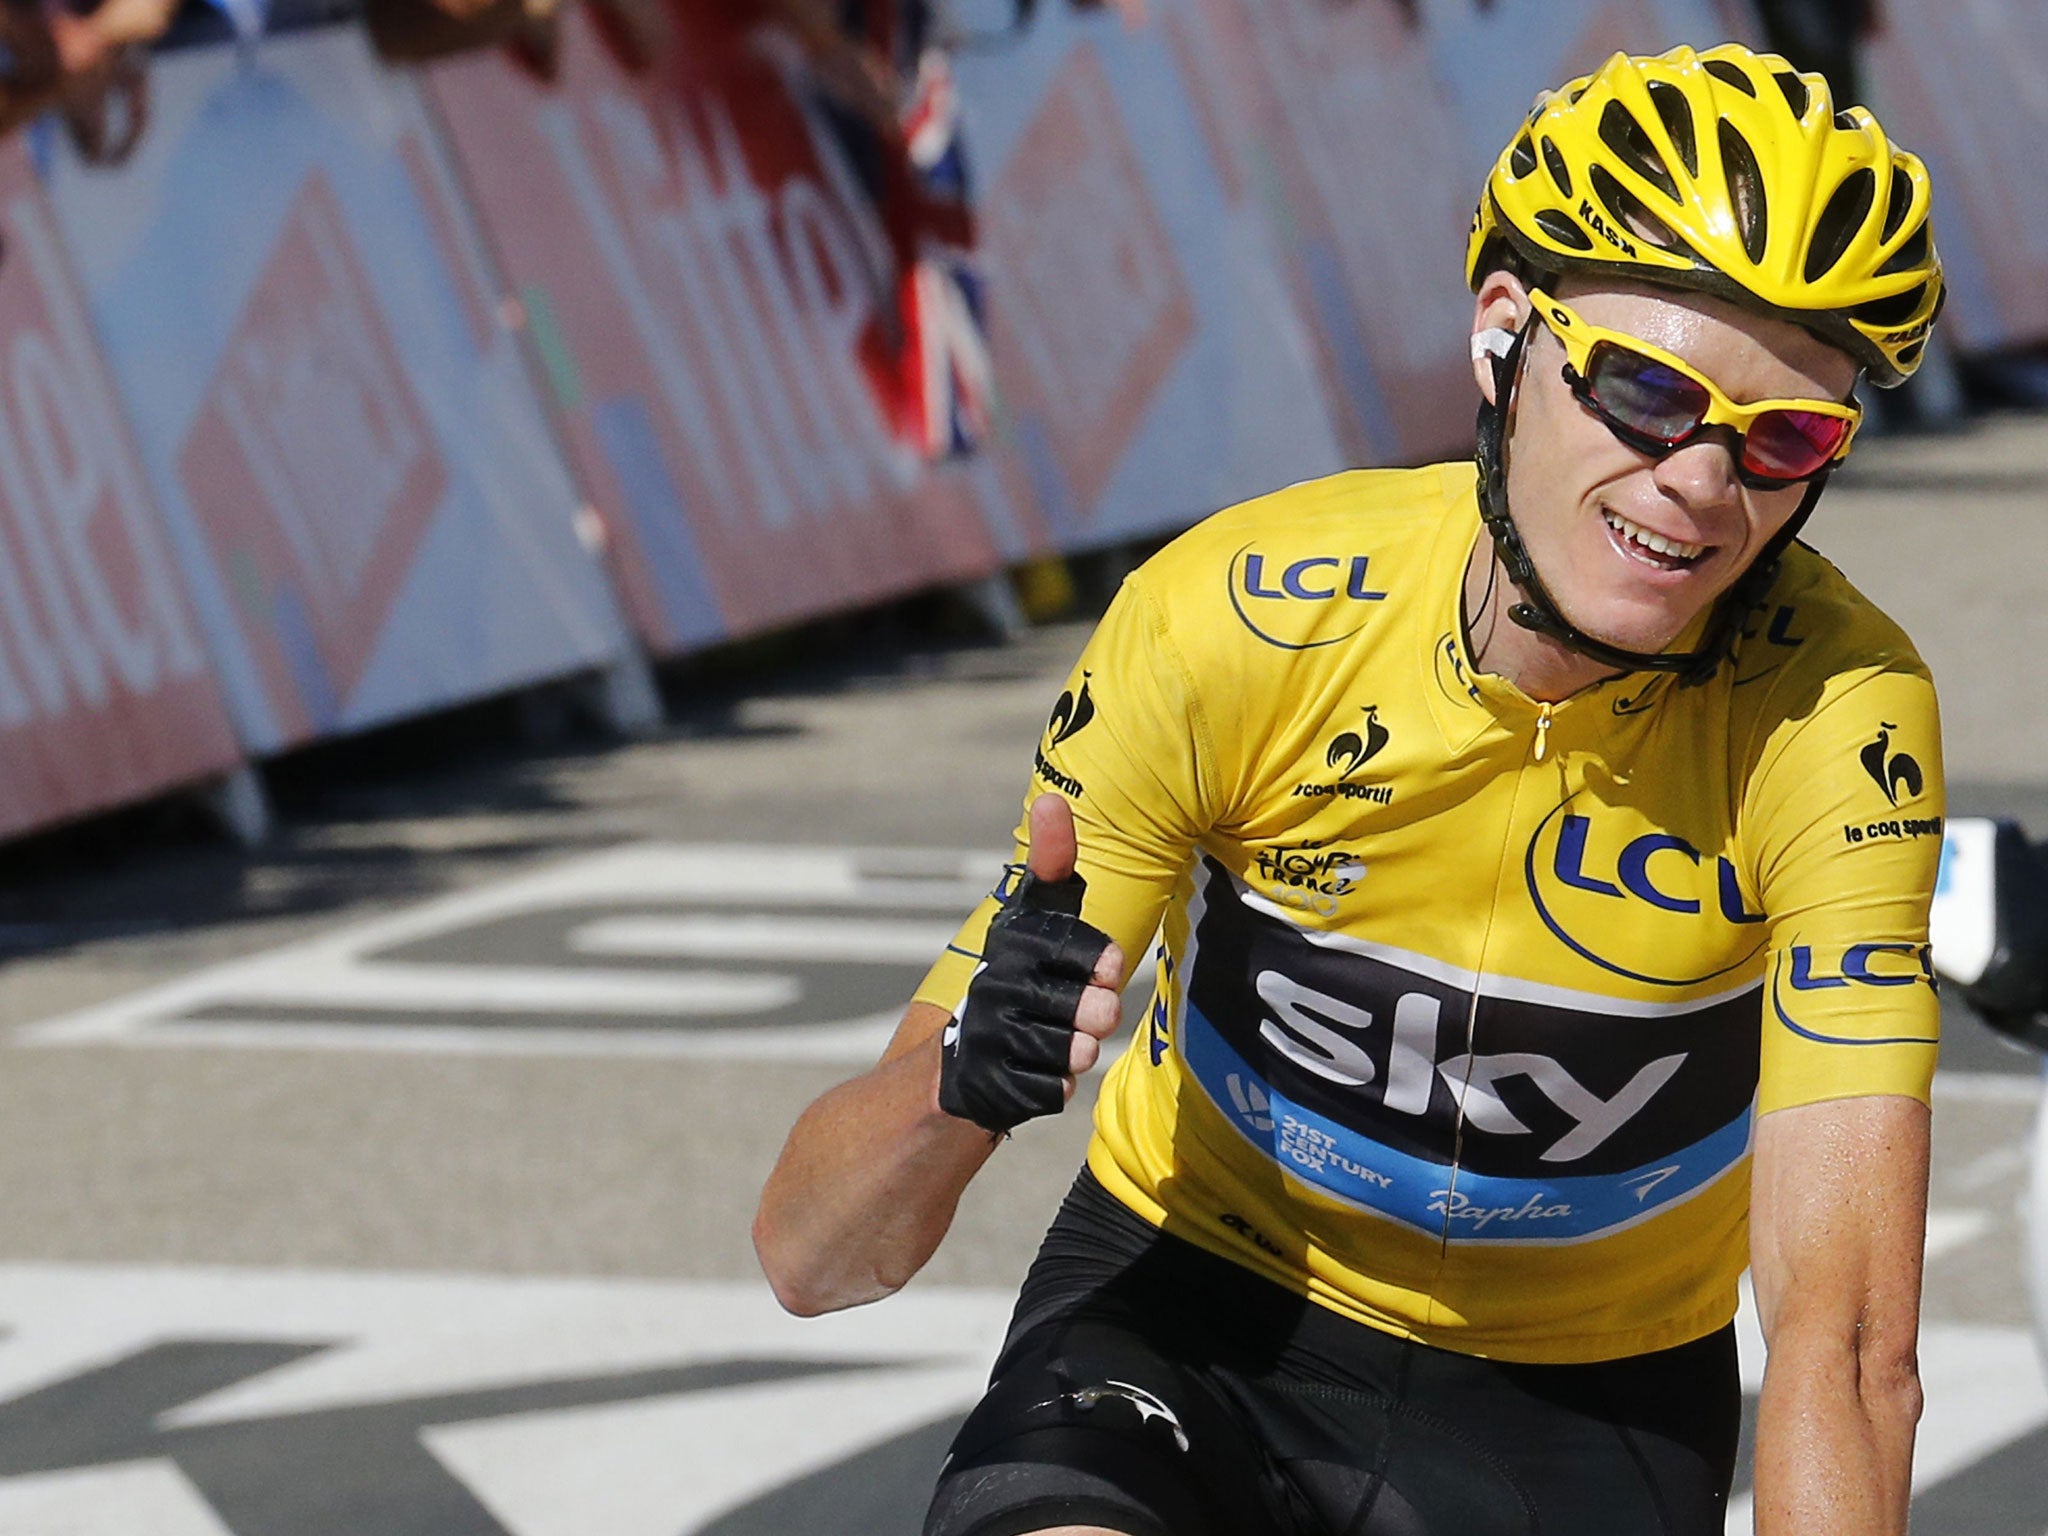 On the road to Paris: Tour leader Chris Froome finishing yesterday’s stage